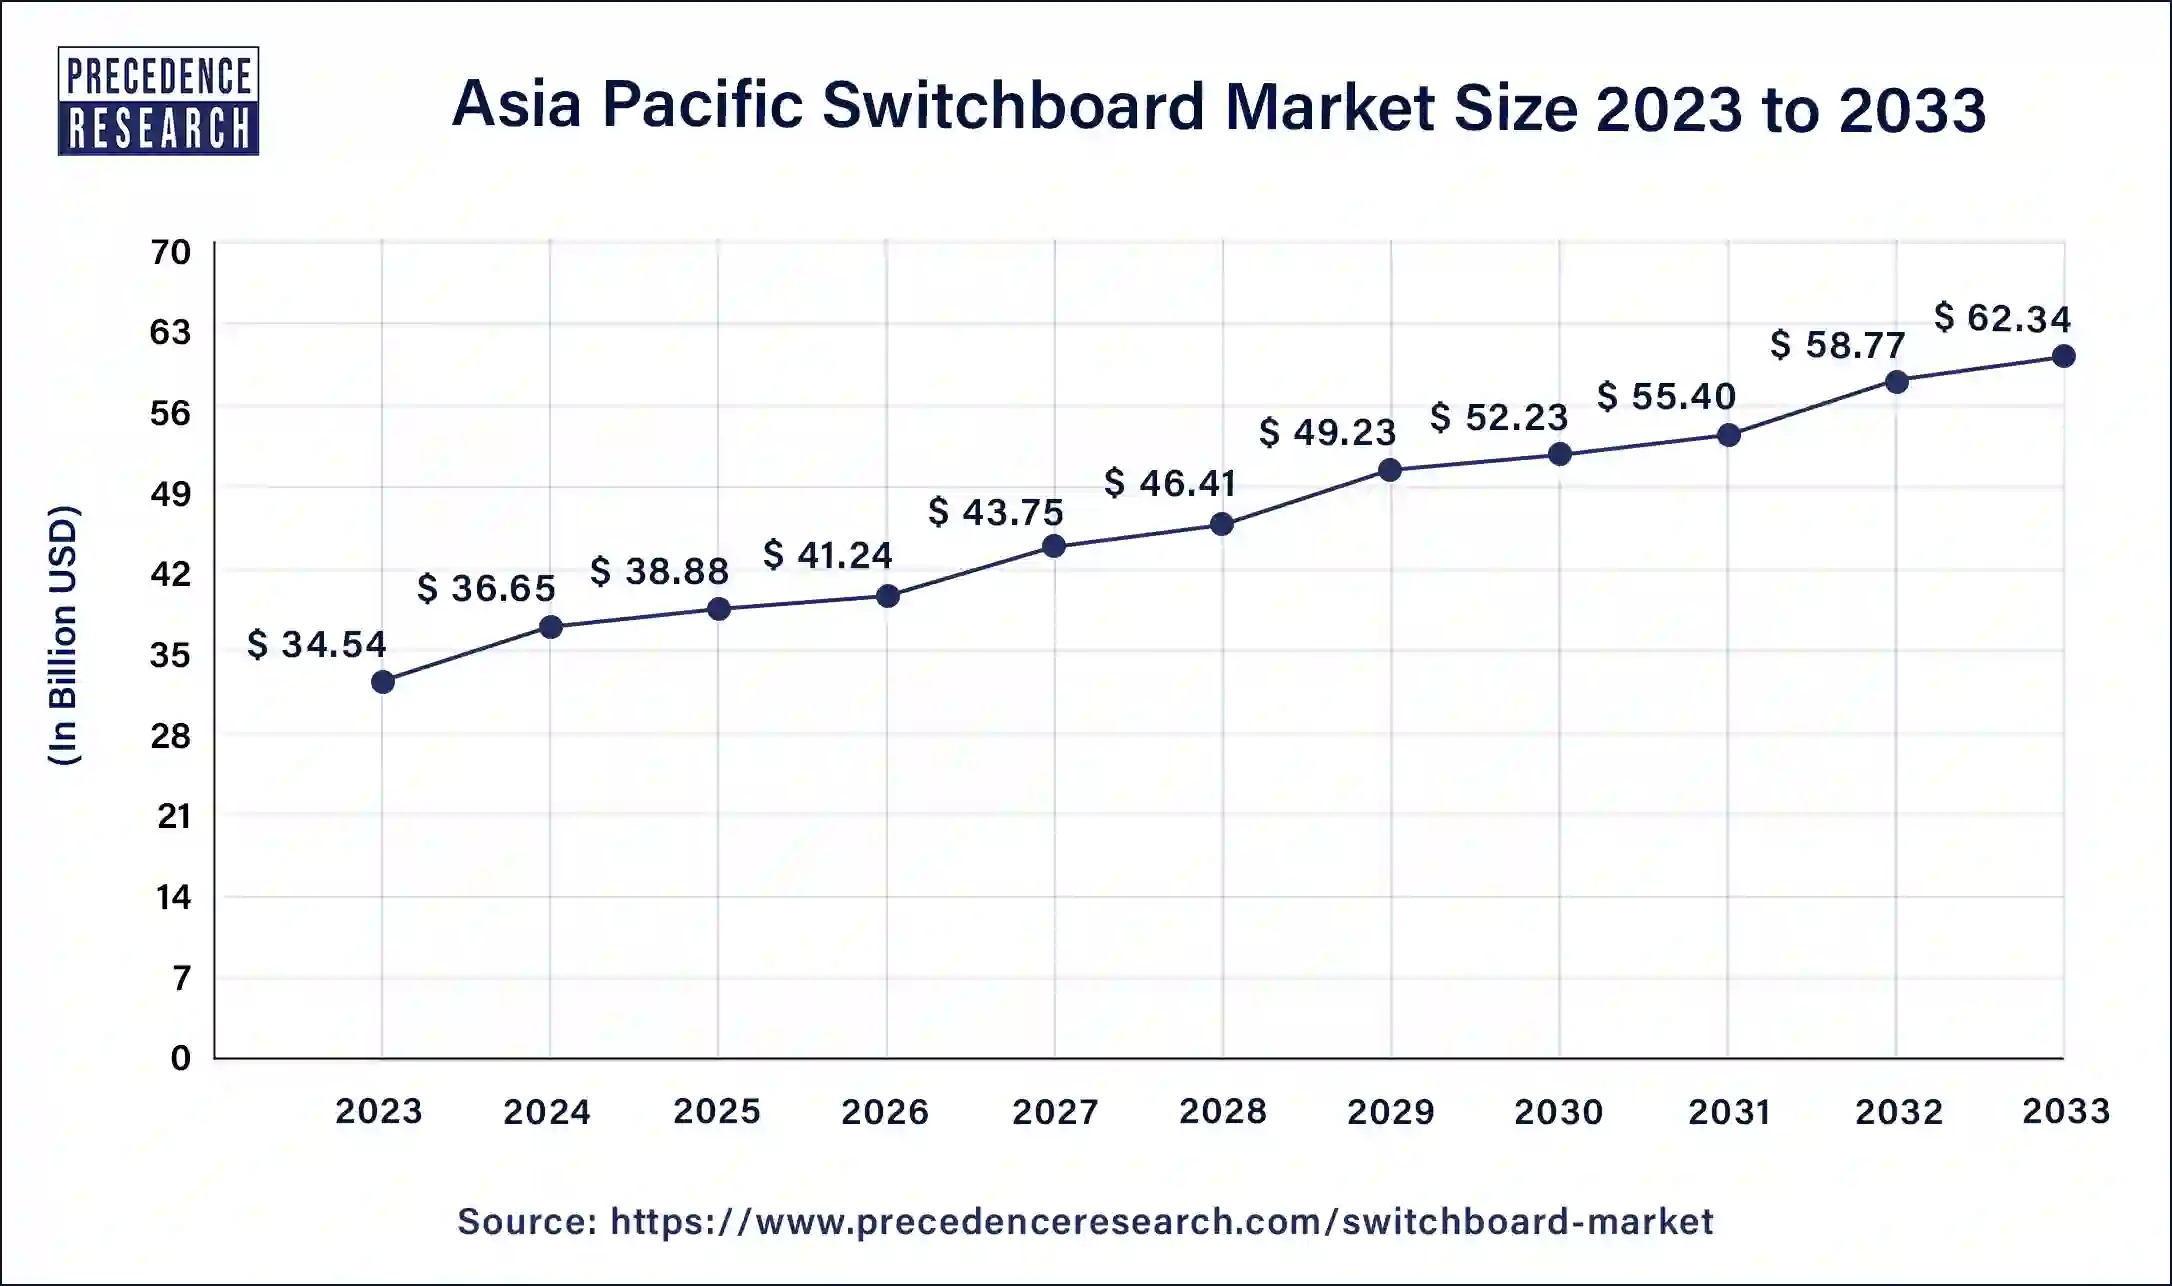 Asia Pacific Switchboard Market Size 2024 to 2033